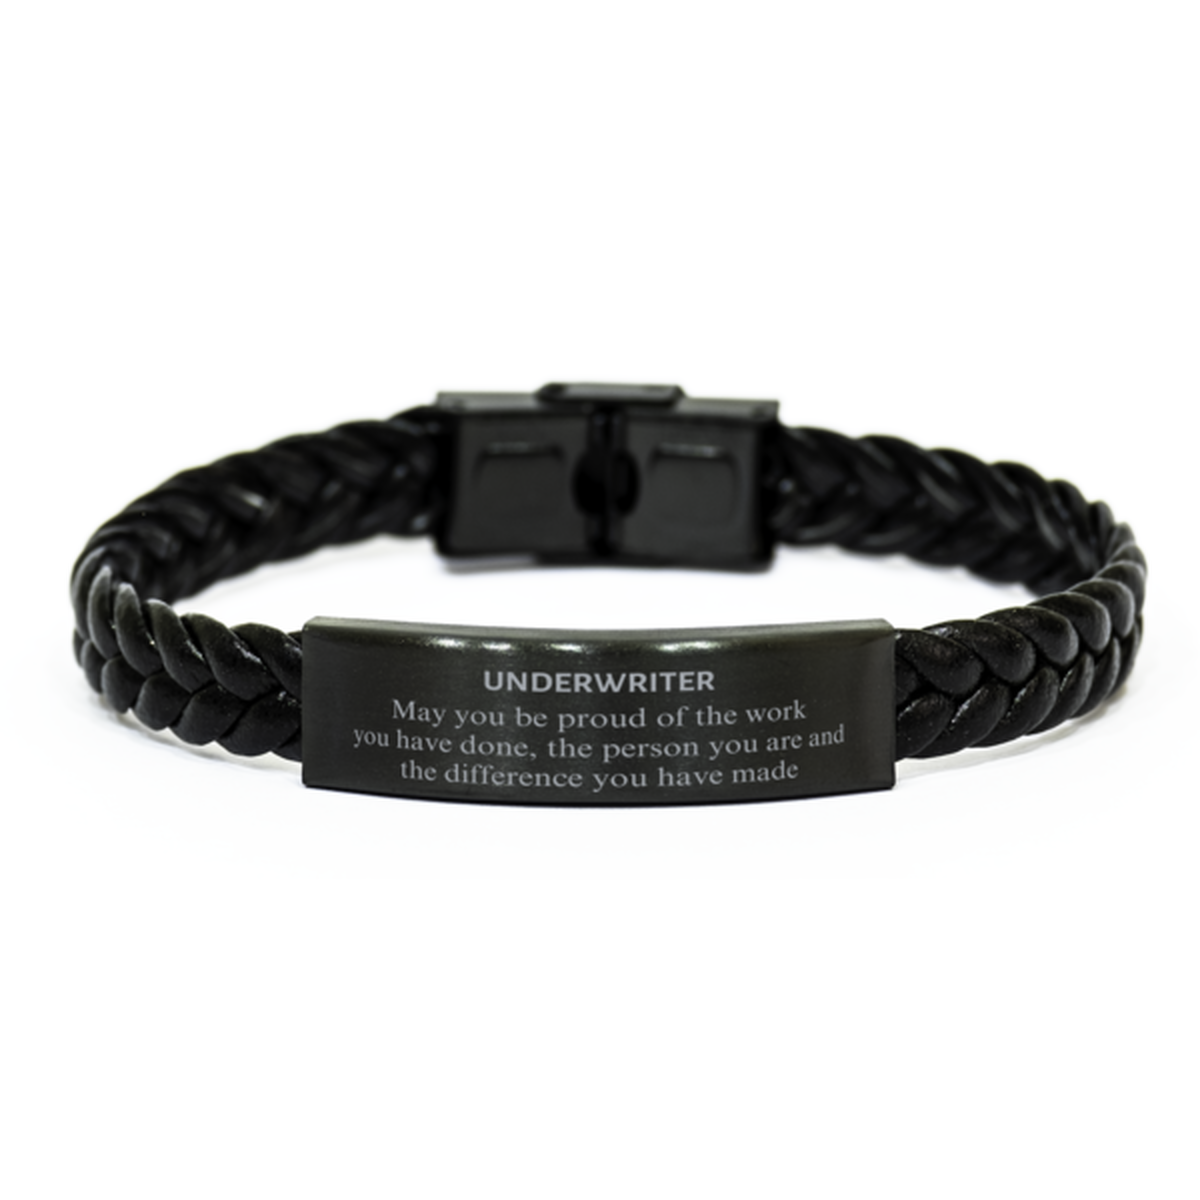 Underwriter May you be proud of the work you have done, Retirement Underwriter Braided Leather Bracelet for Colleague Appreciation Gifts Amazing for Underwriter